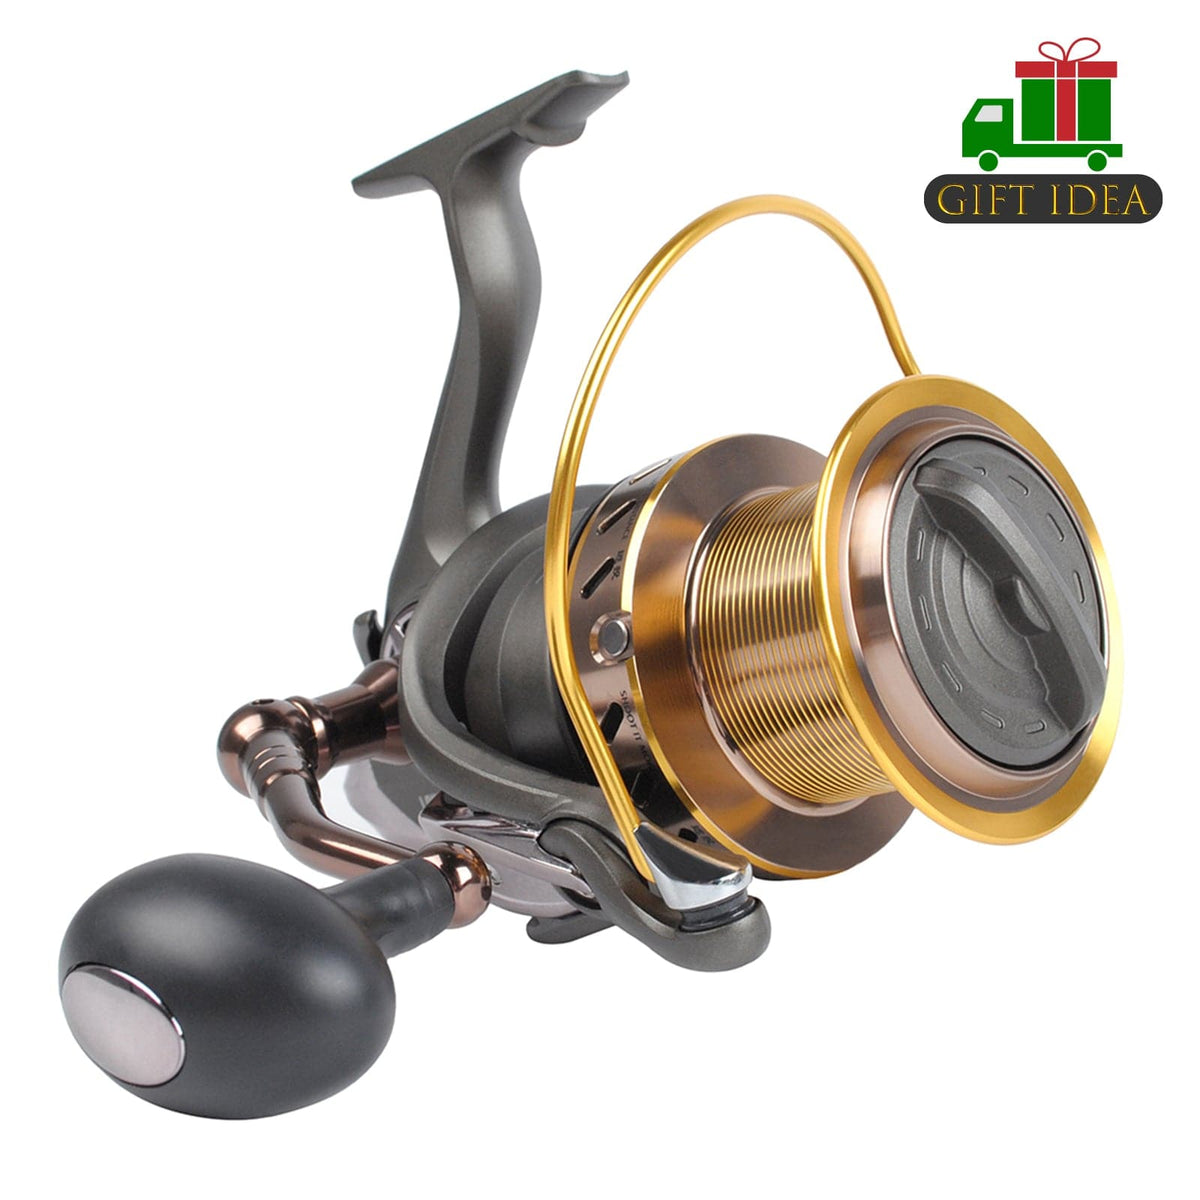 Strengther Reel Feet Middle/Large Size Fish Fishing Reel Metal